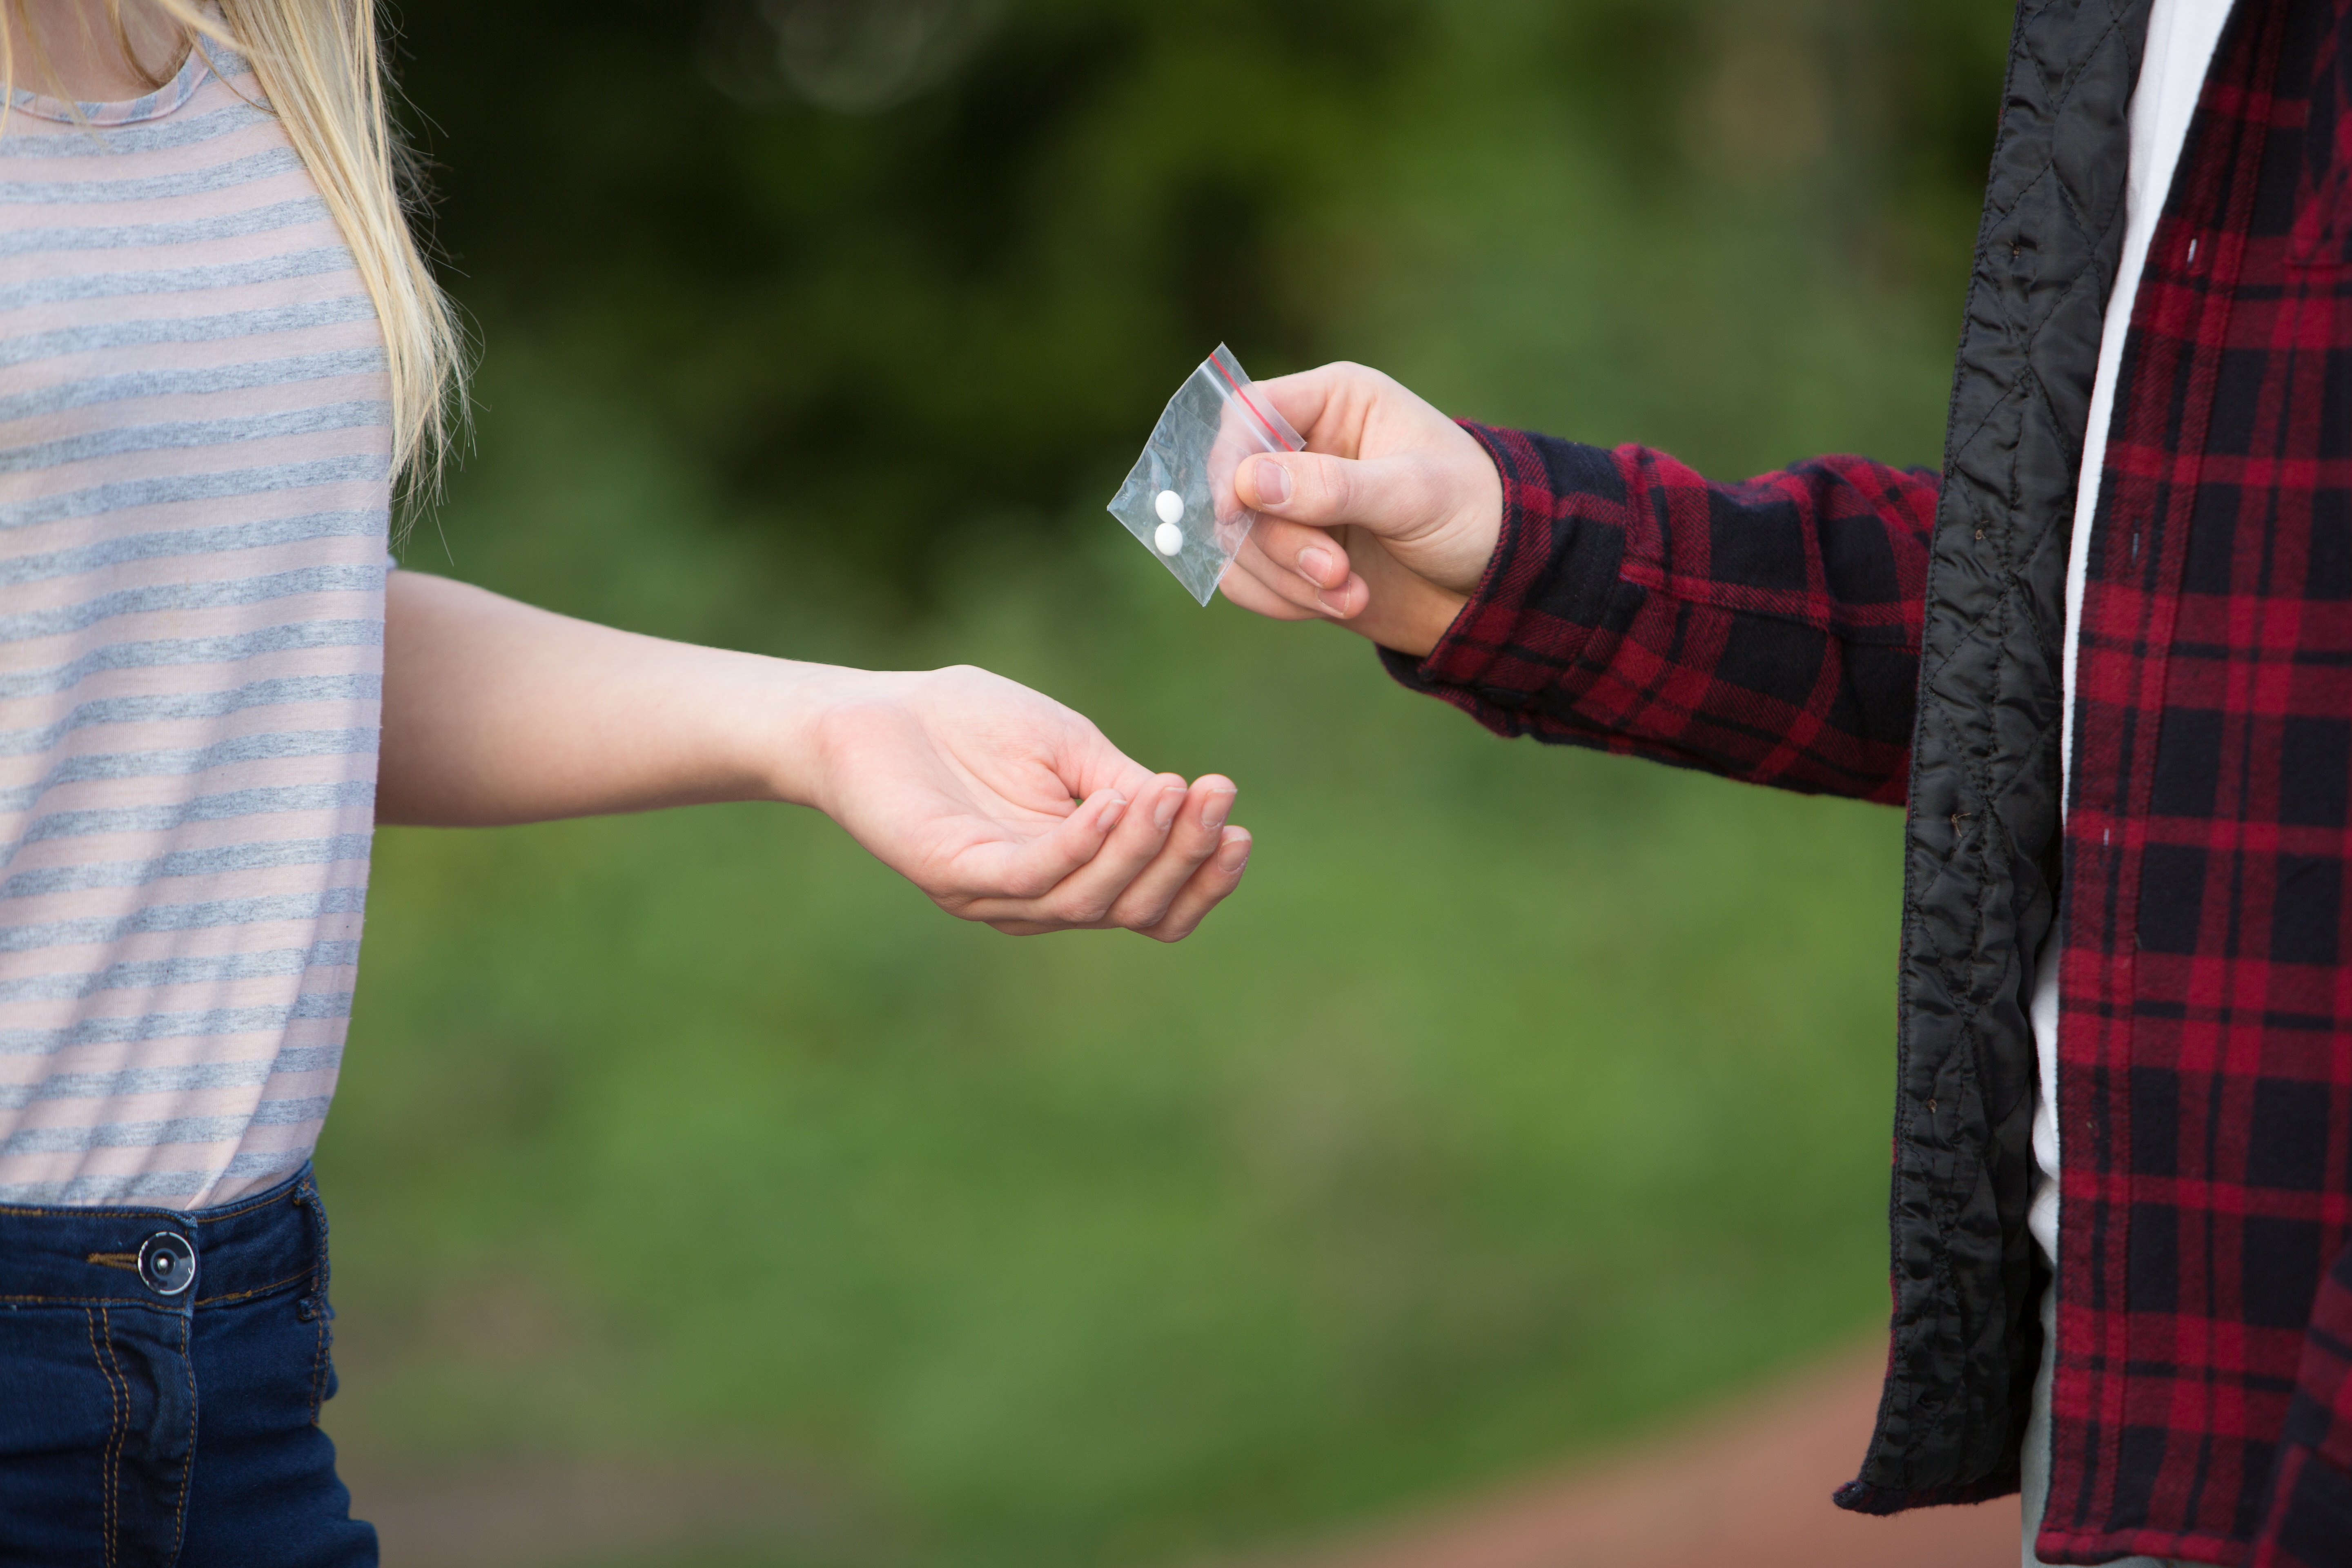 A teenage girl buying drugs from a boy outside school, photo by Daisy-Daisy/Getty Images